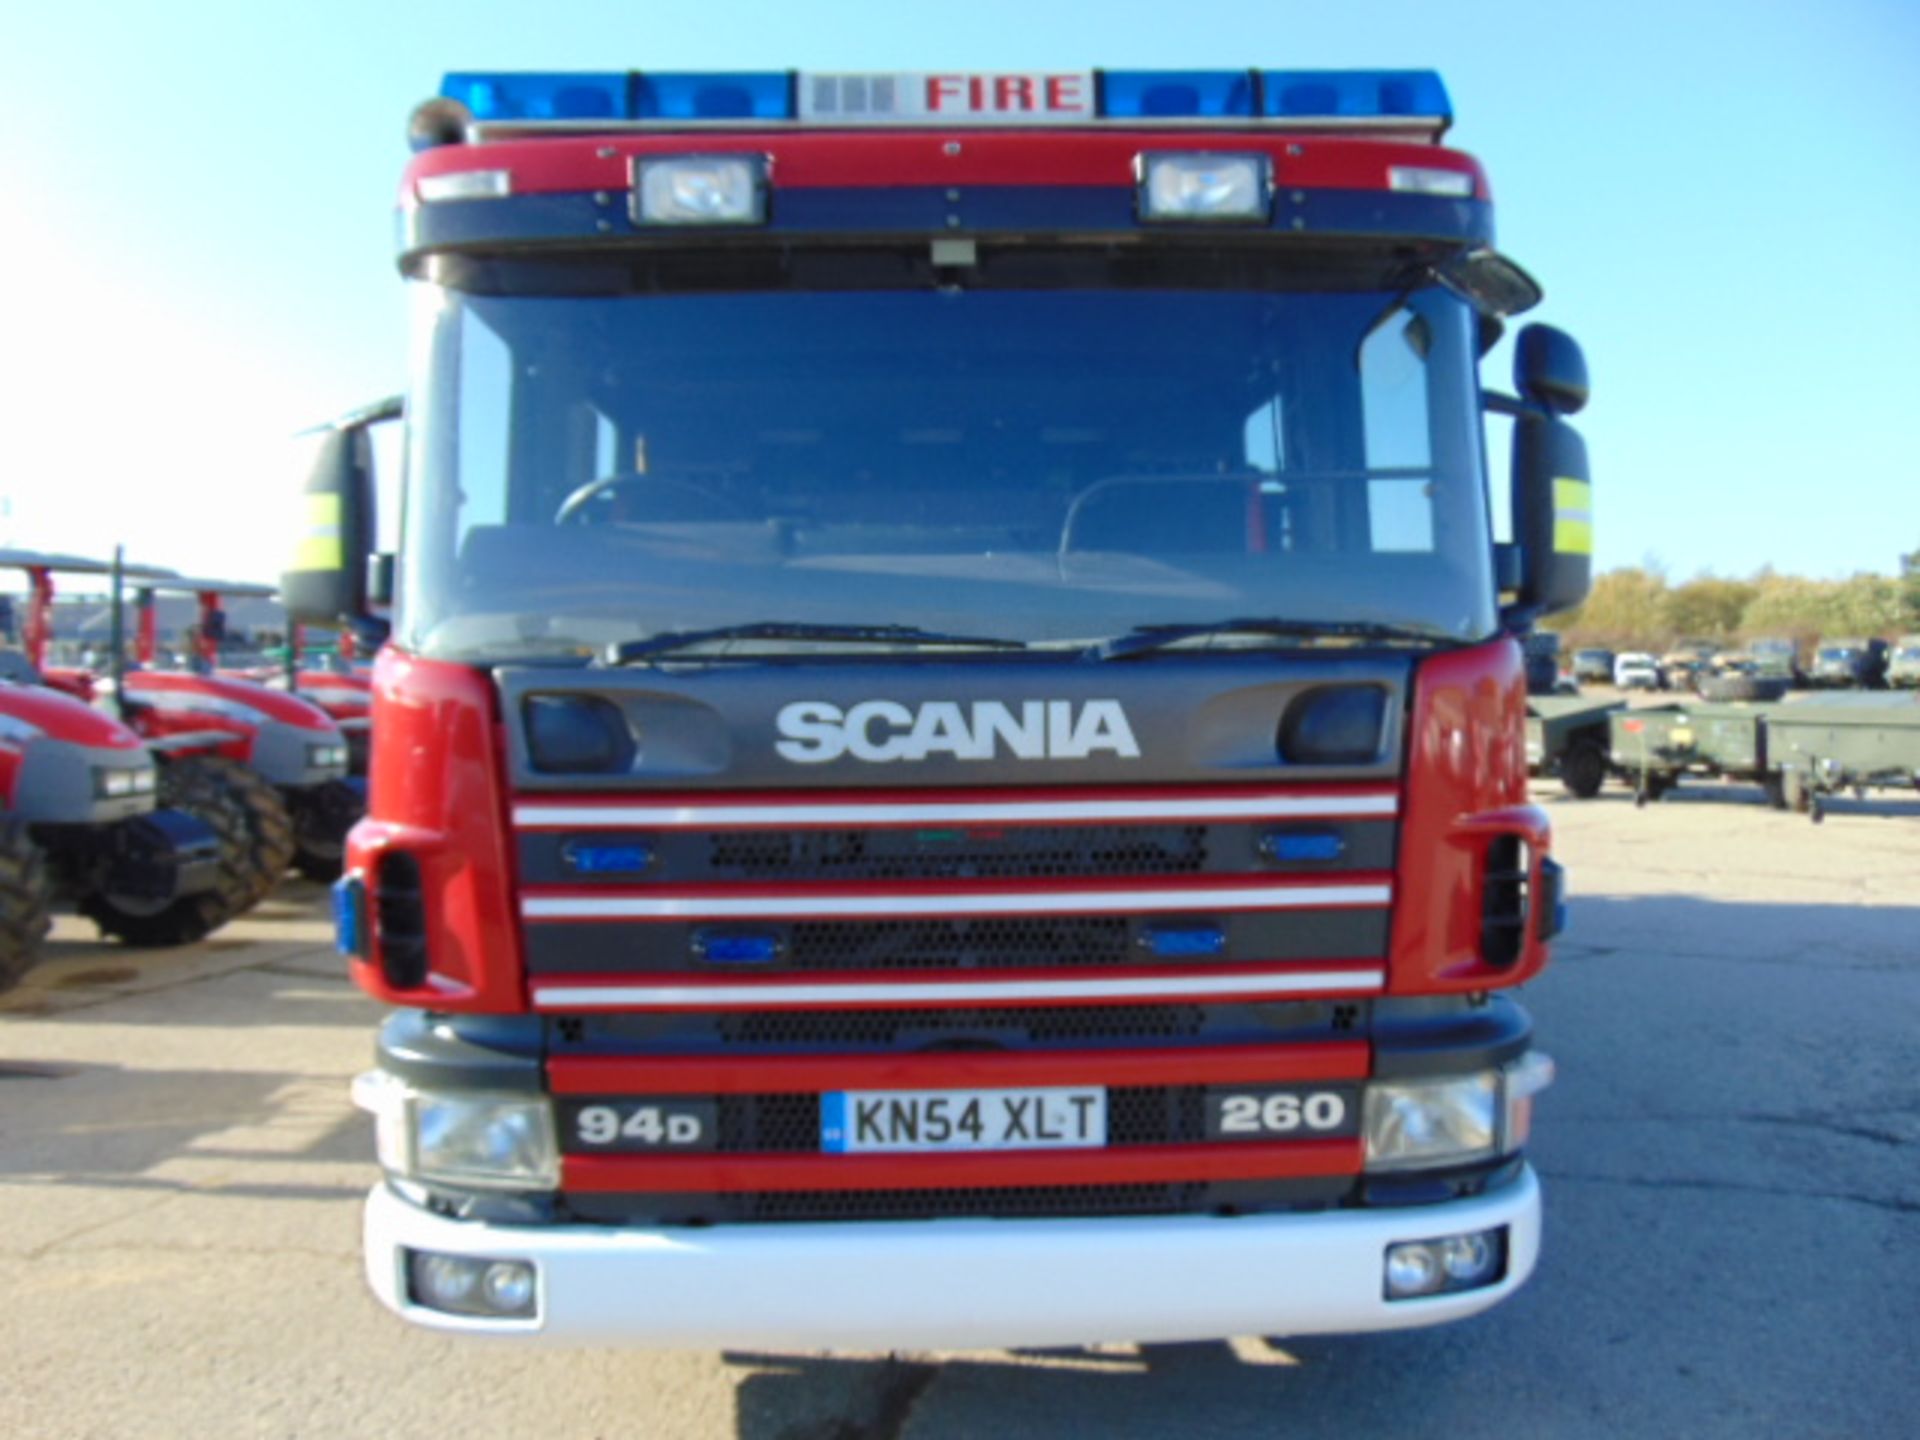 Scania 94D 260 / Emergency One Fire Engine - Image 2 of 28